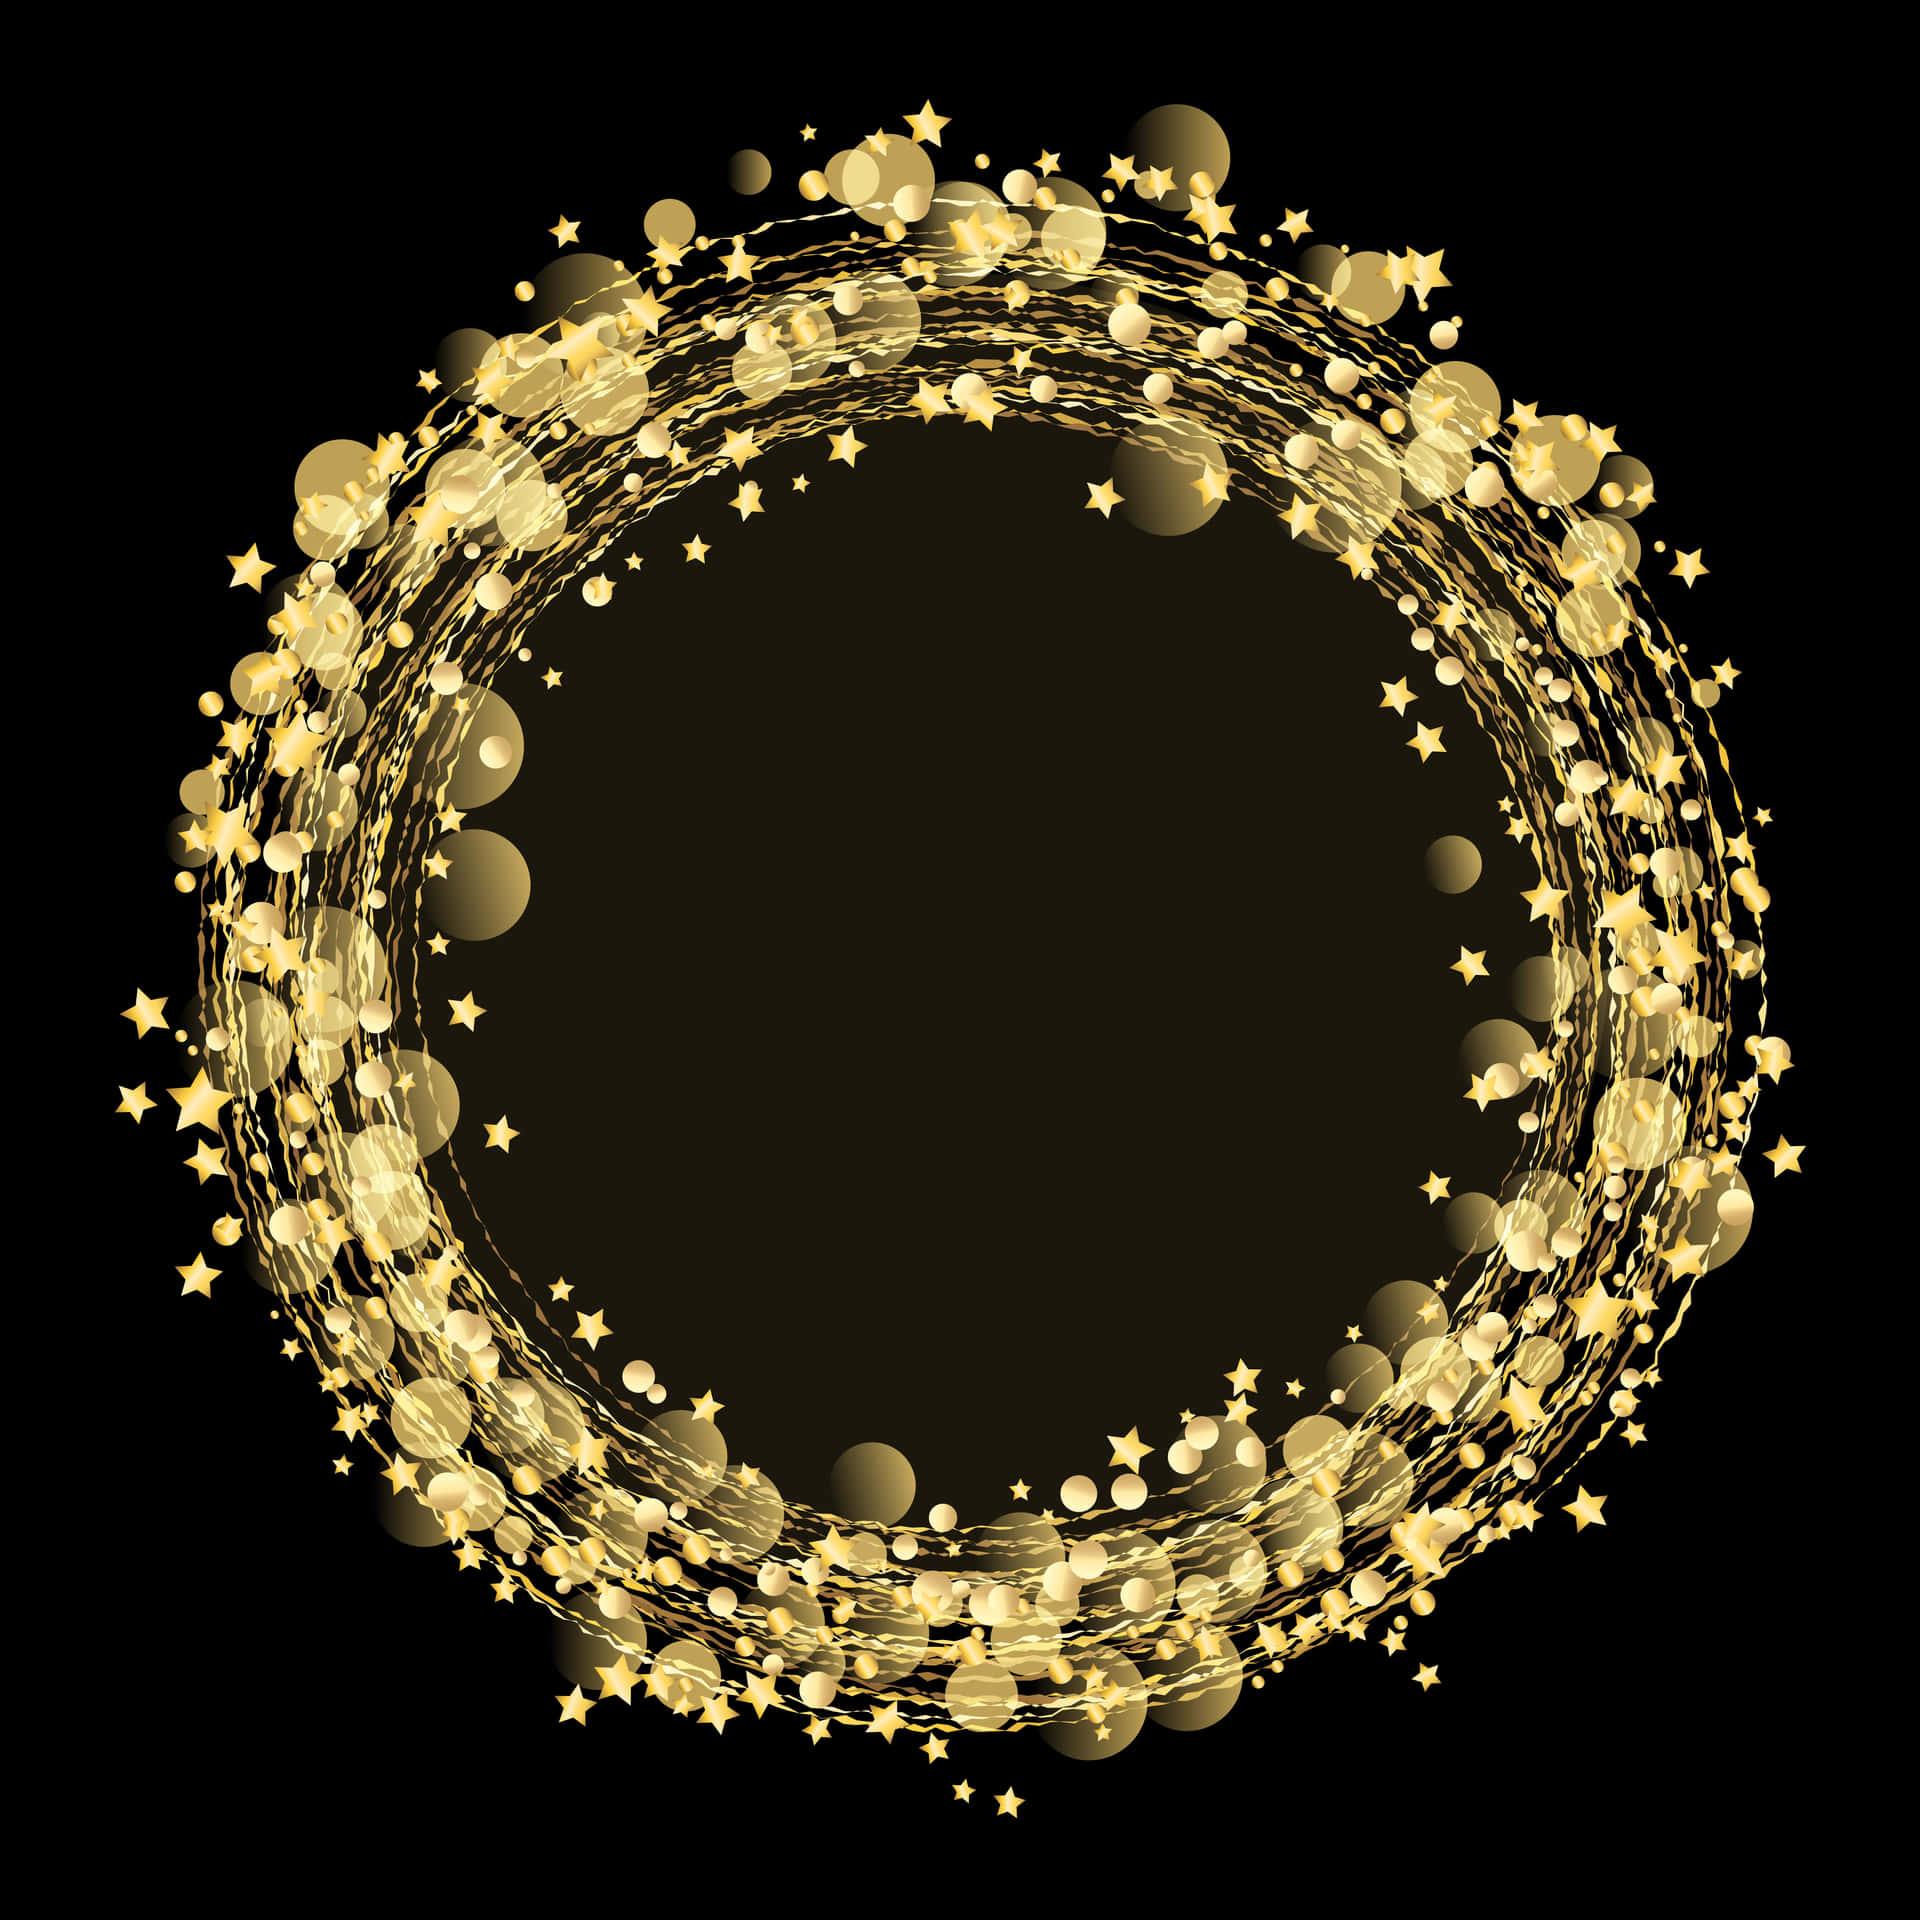 A Golden Circle Frame With Stars On A Black Background